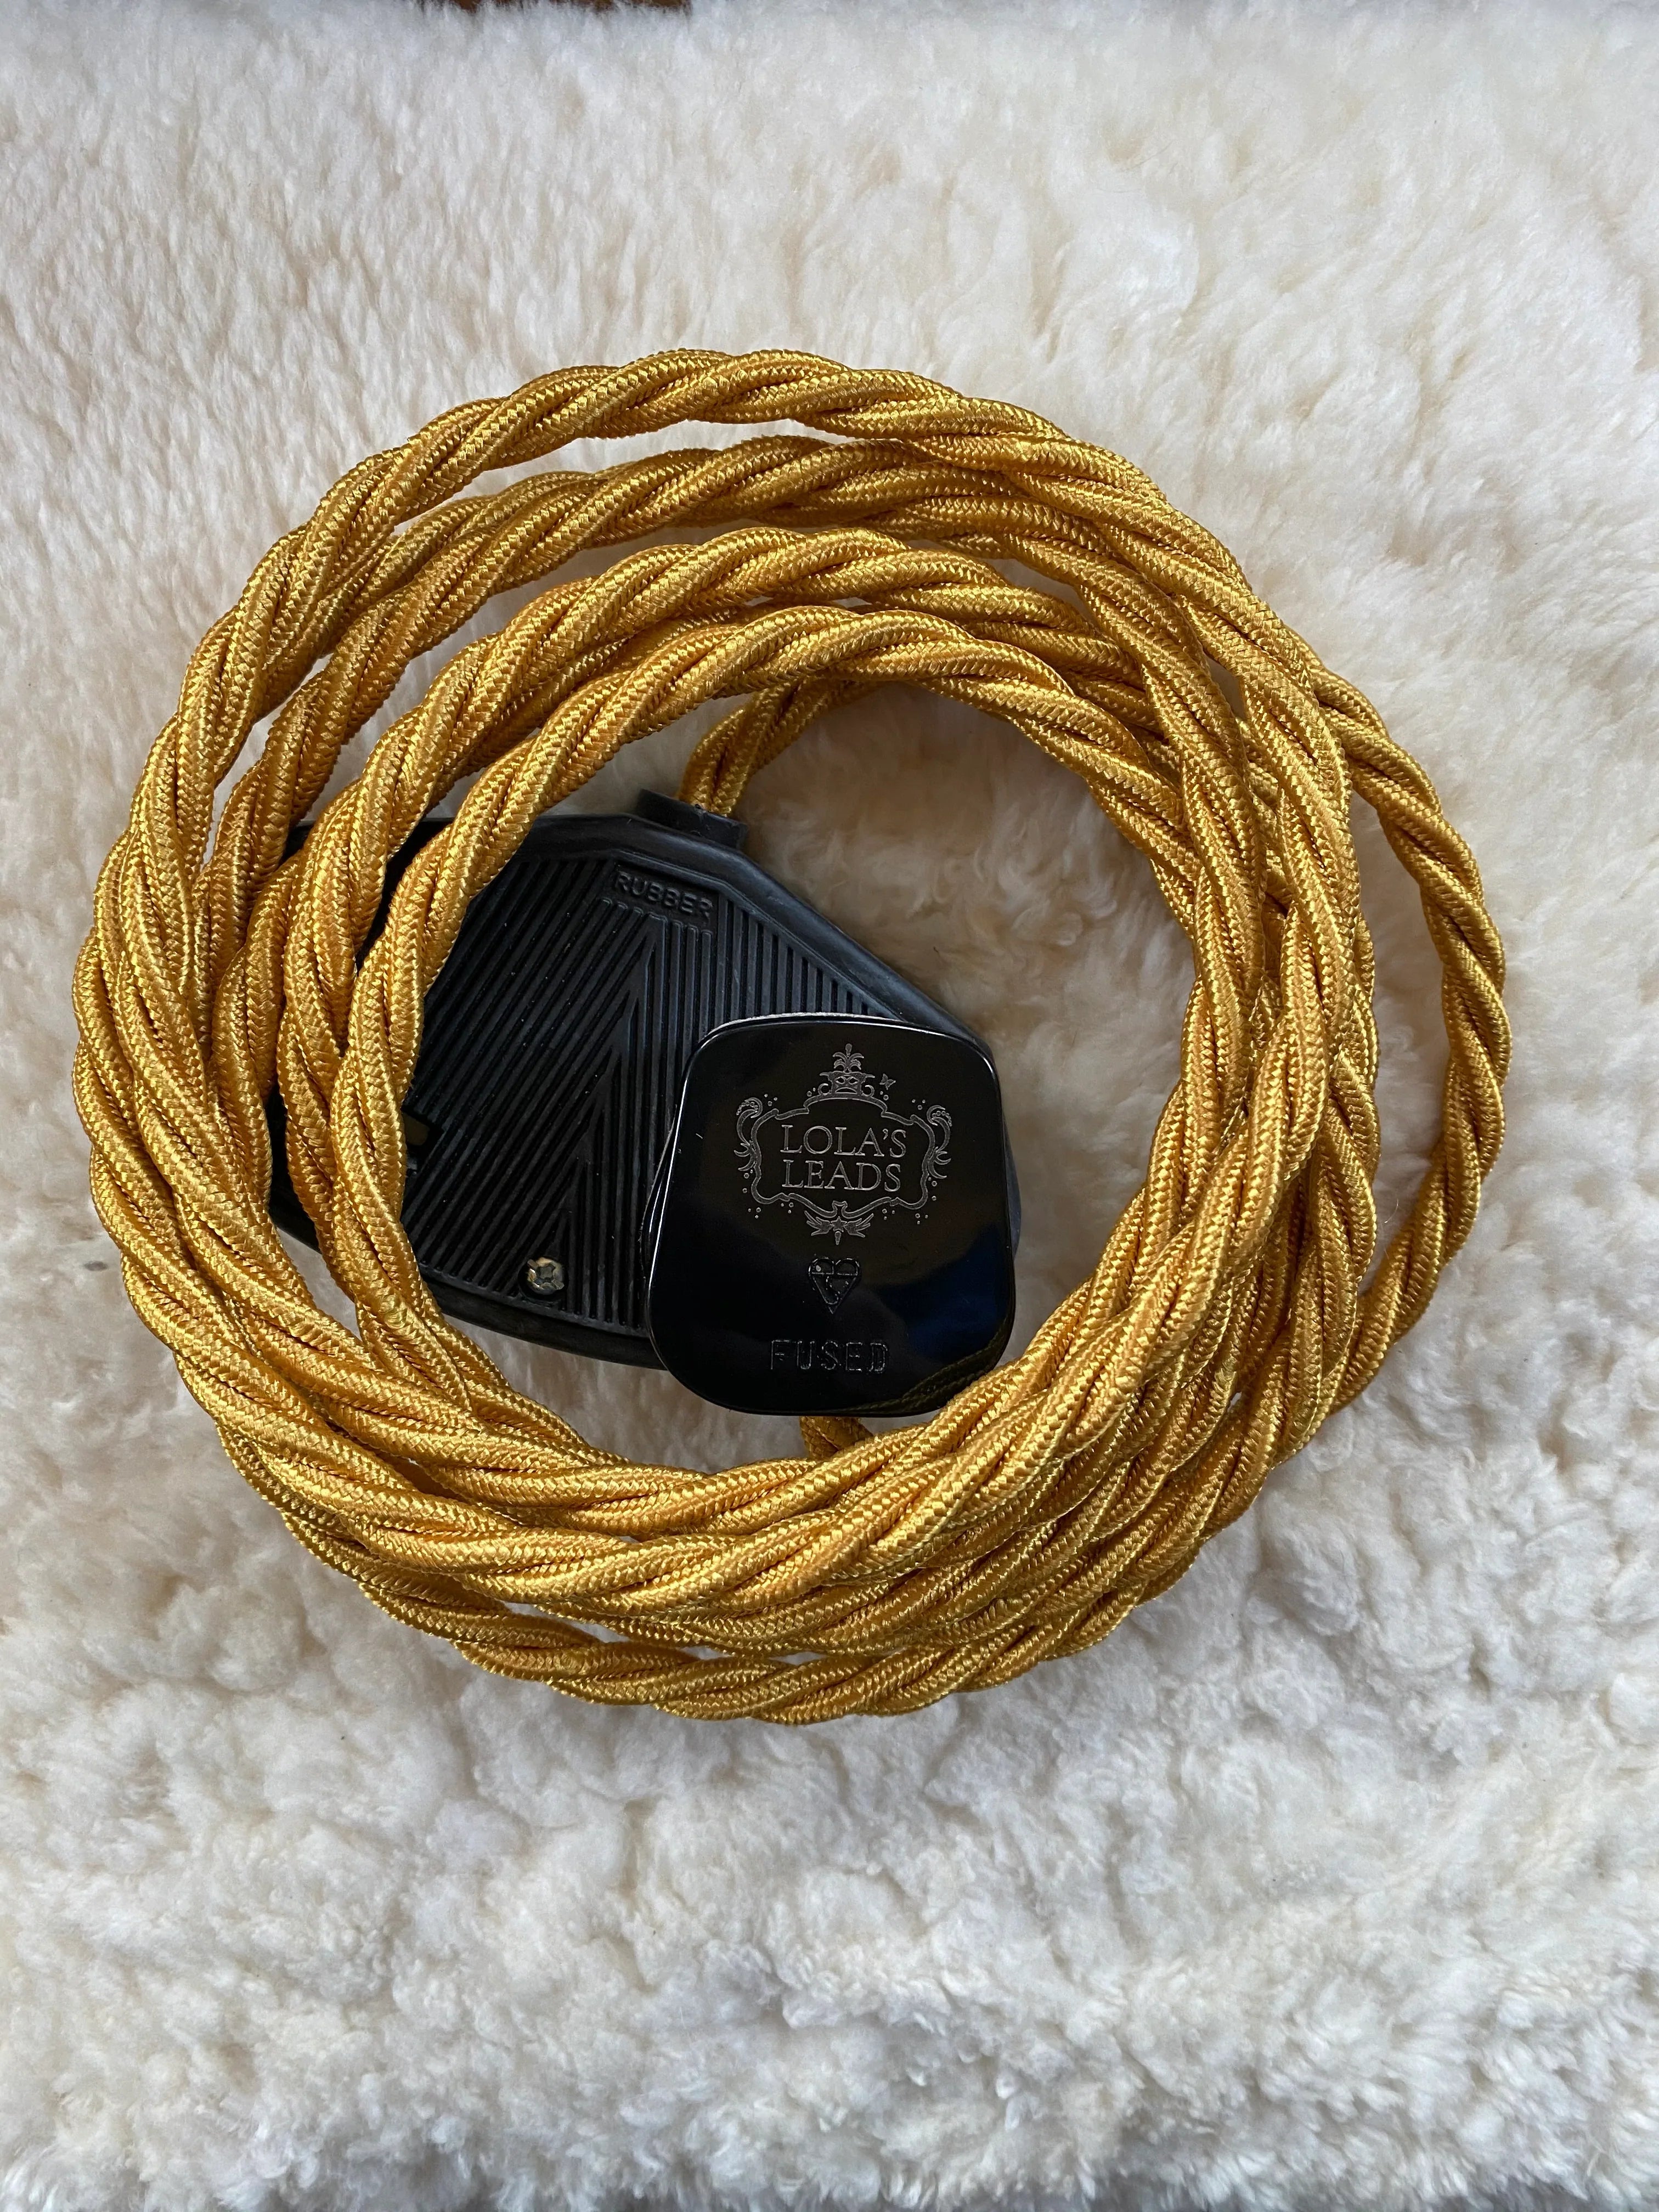 Gold & Black - Lola's Leads Fabric Extension Cable